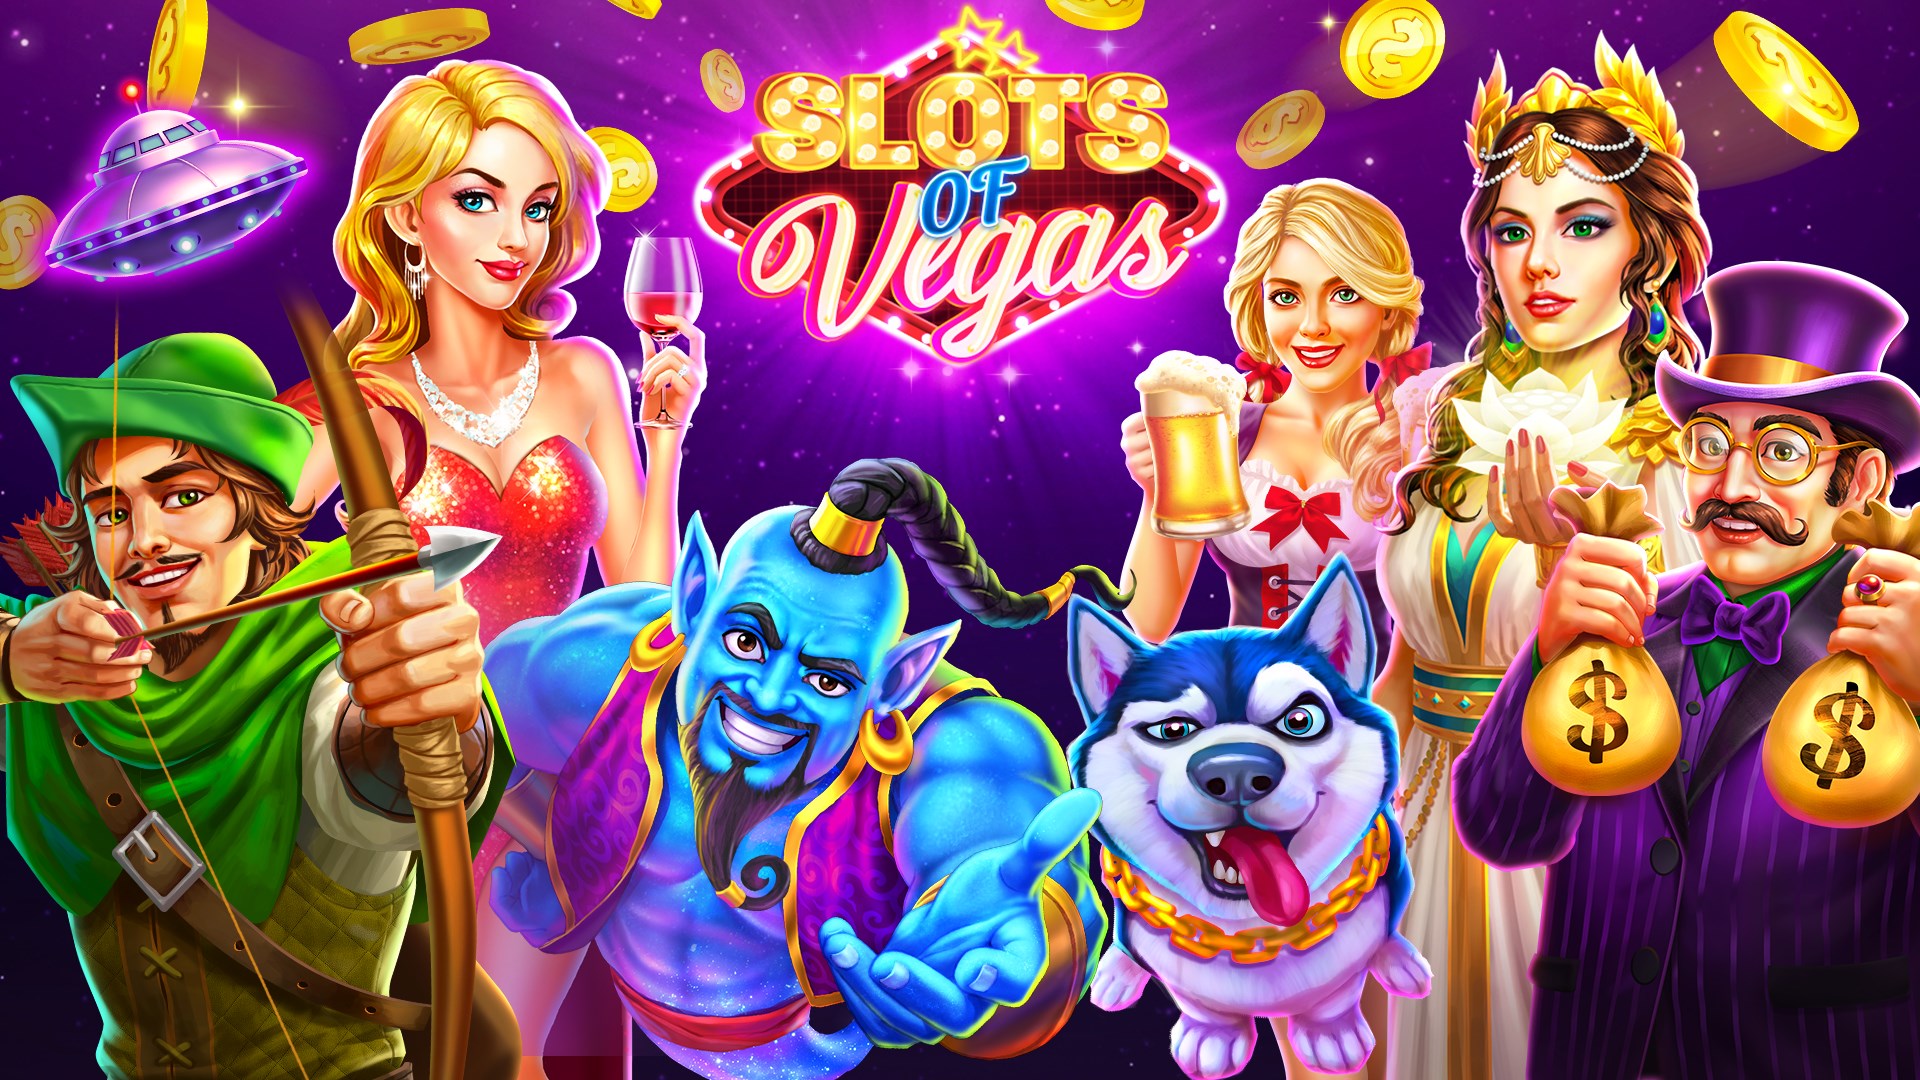 The Best Online Slot Games Released in 2021